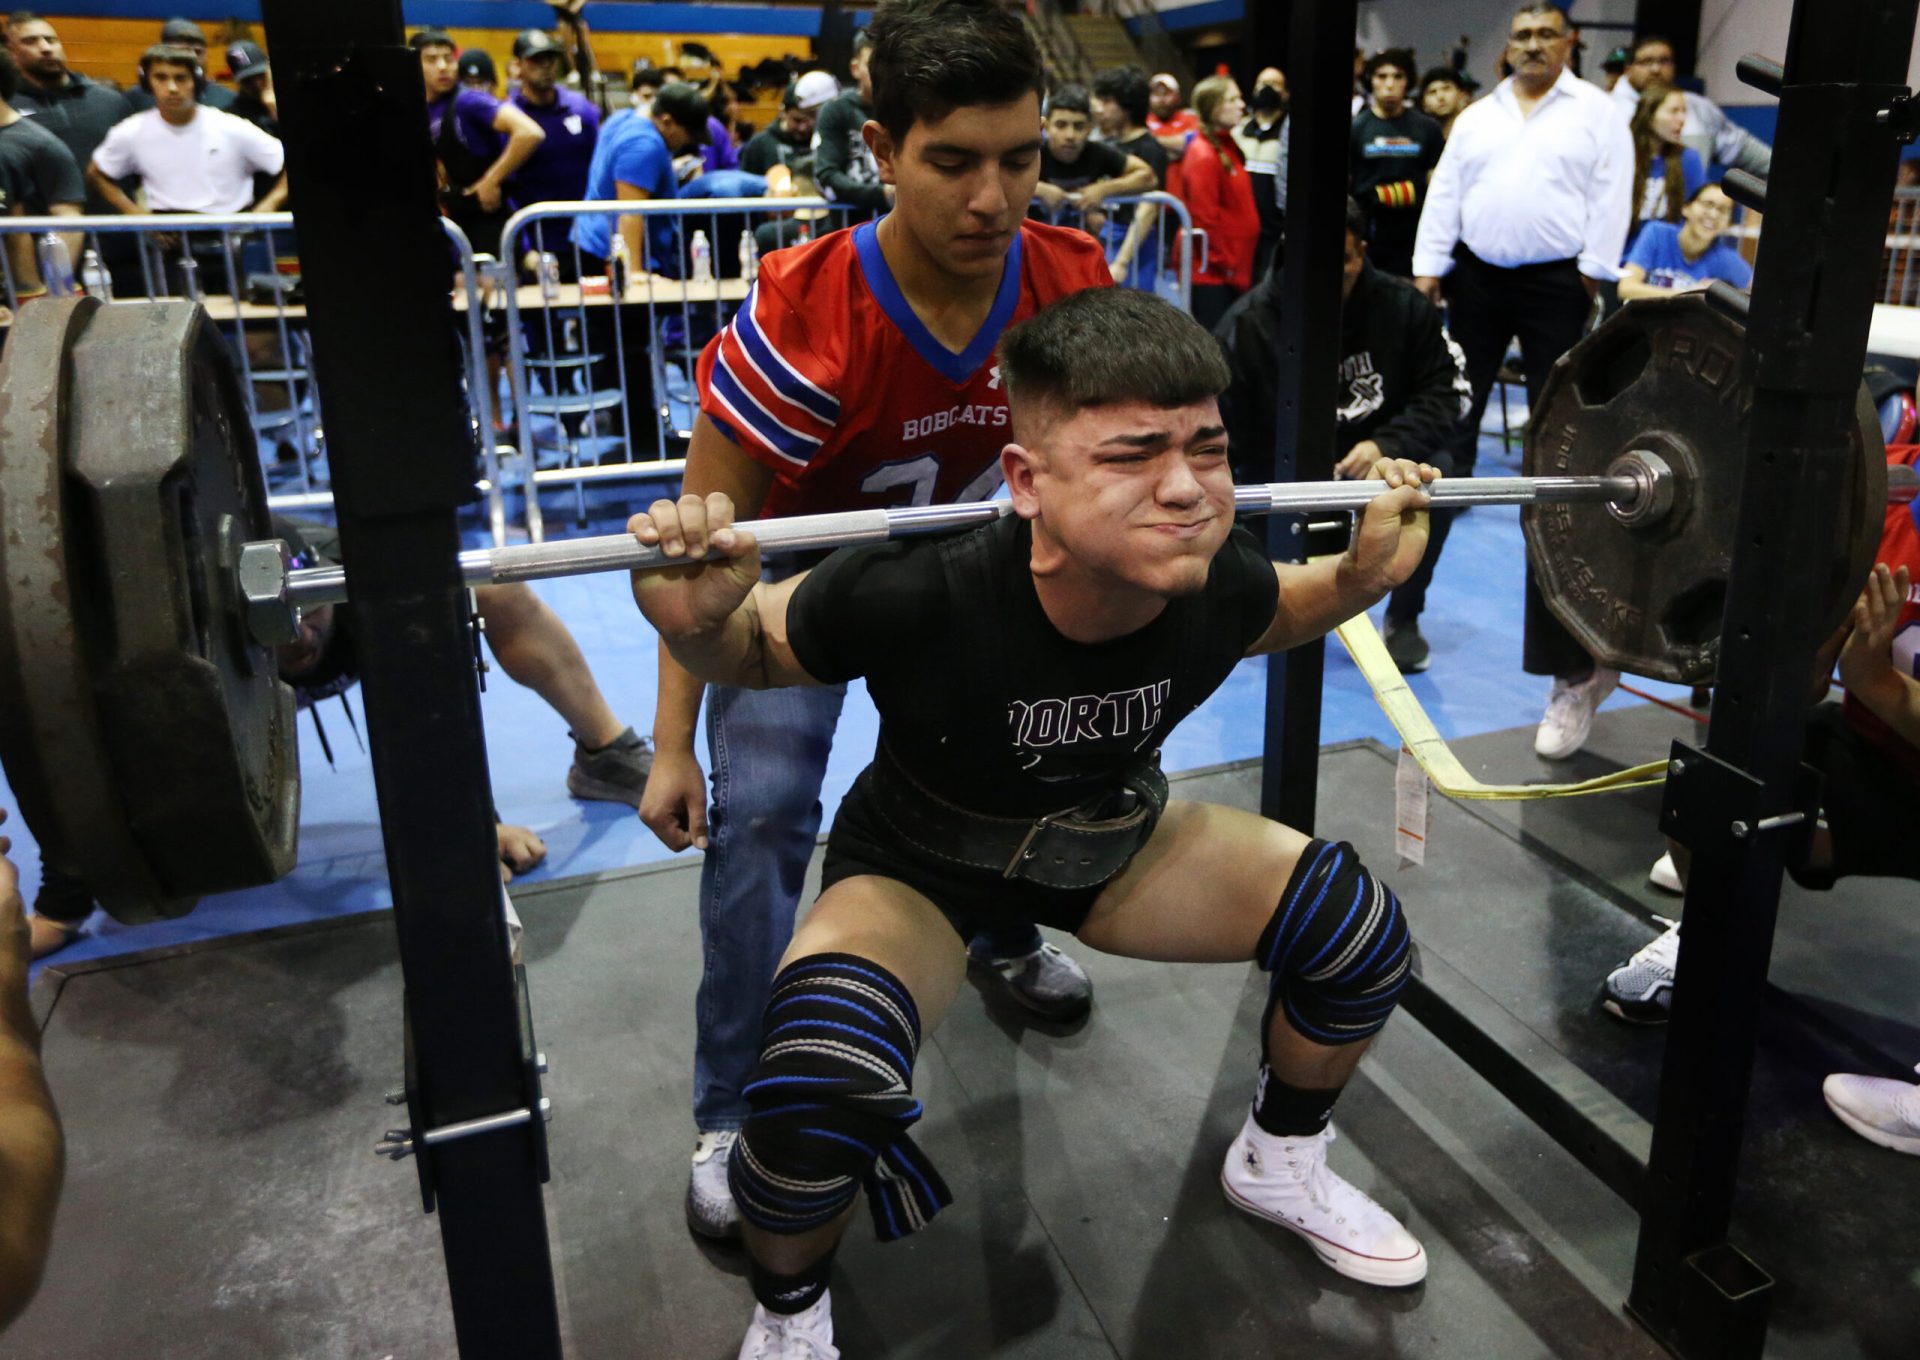 Silva smashes state record with 800-pound squat at Texas